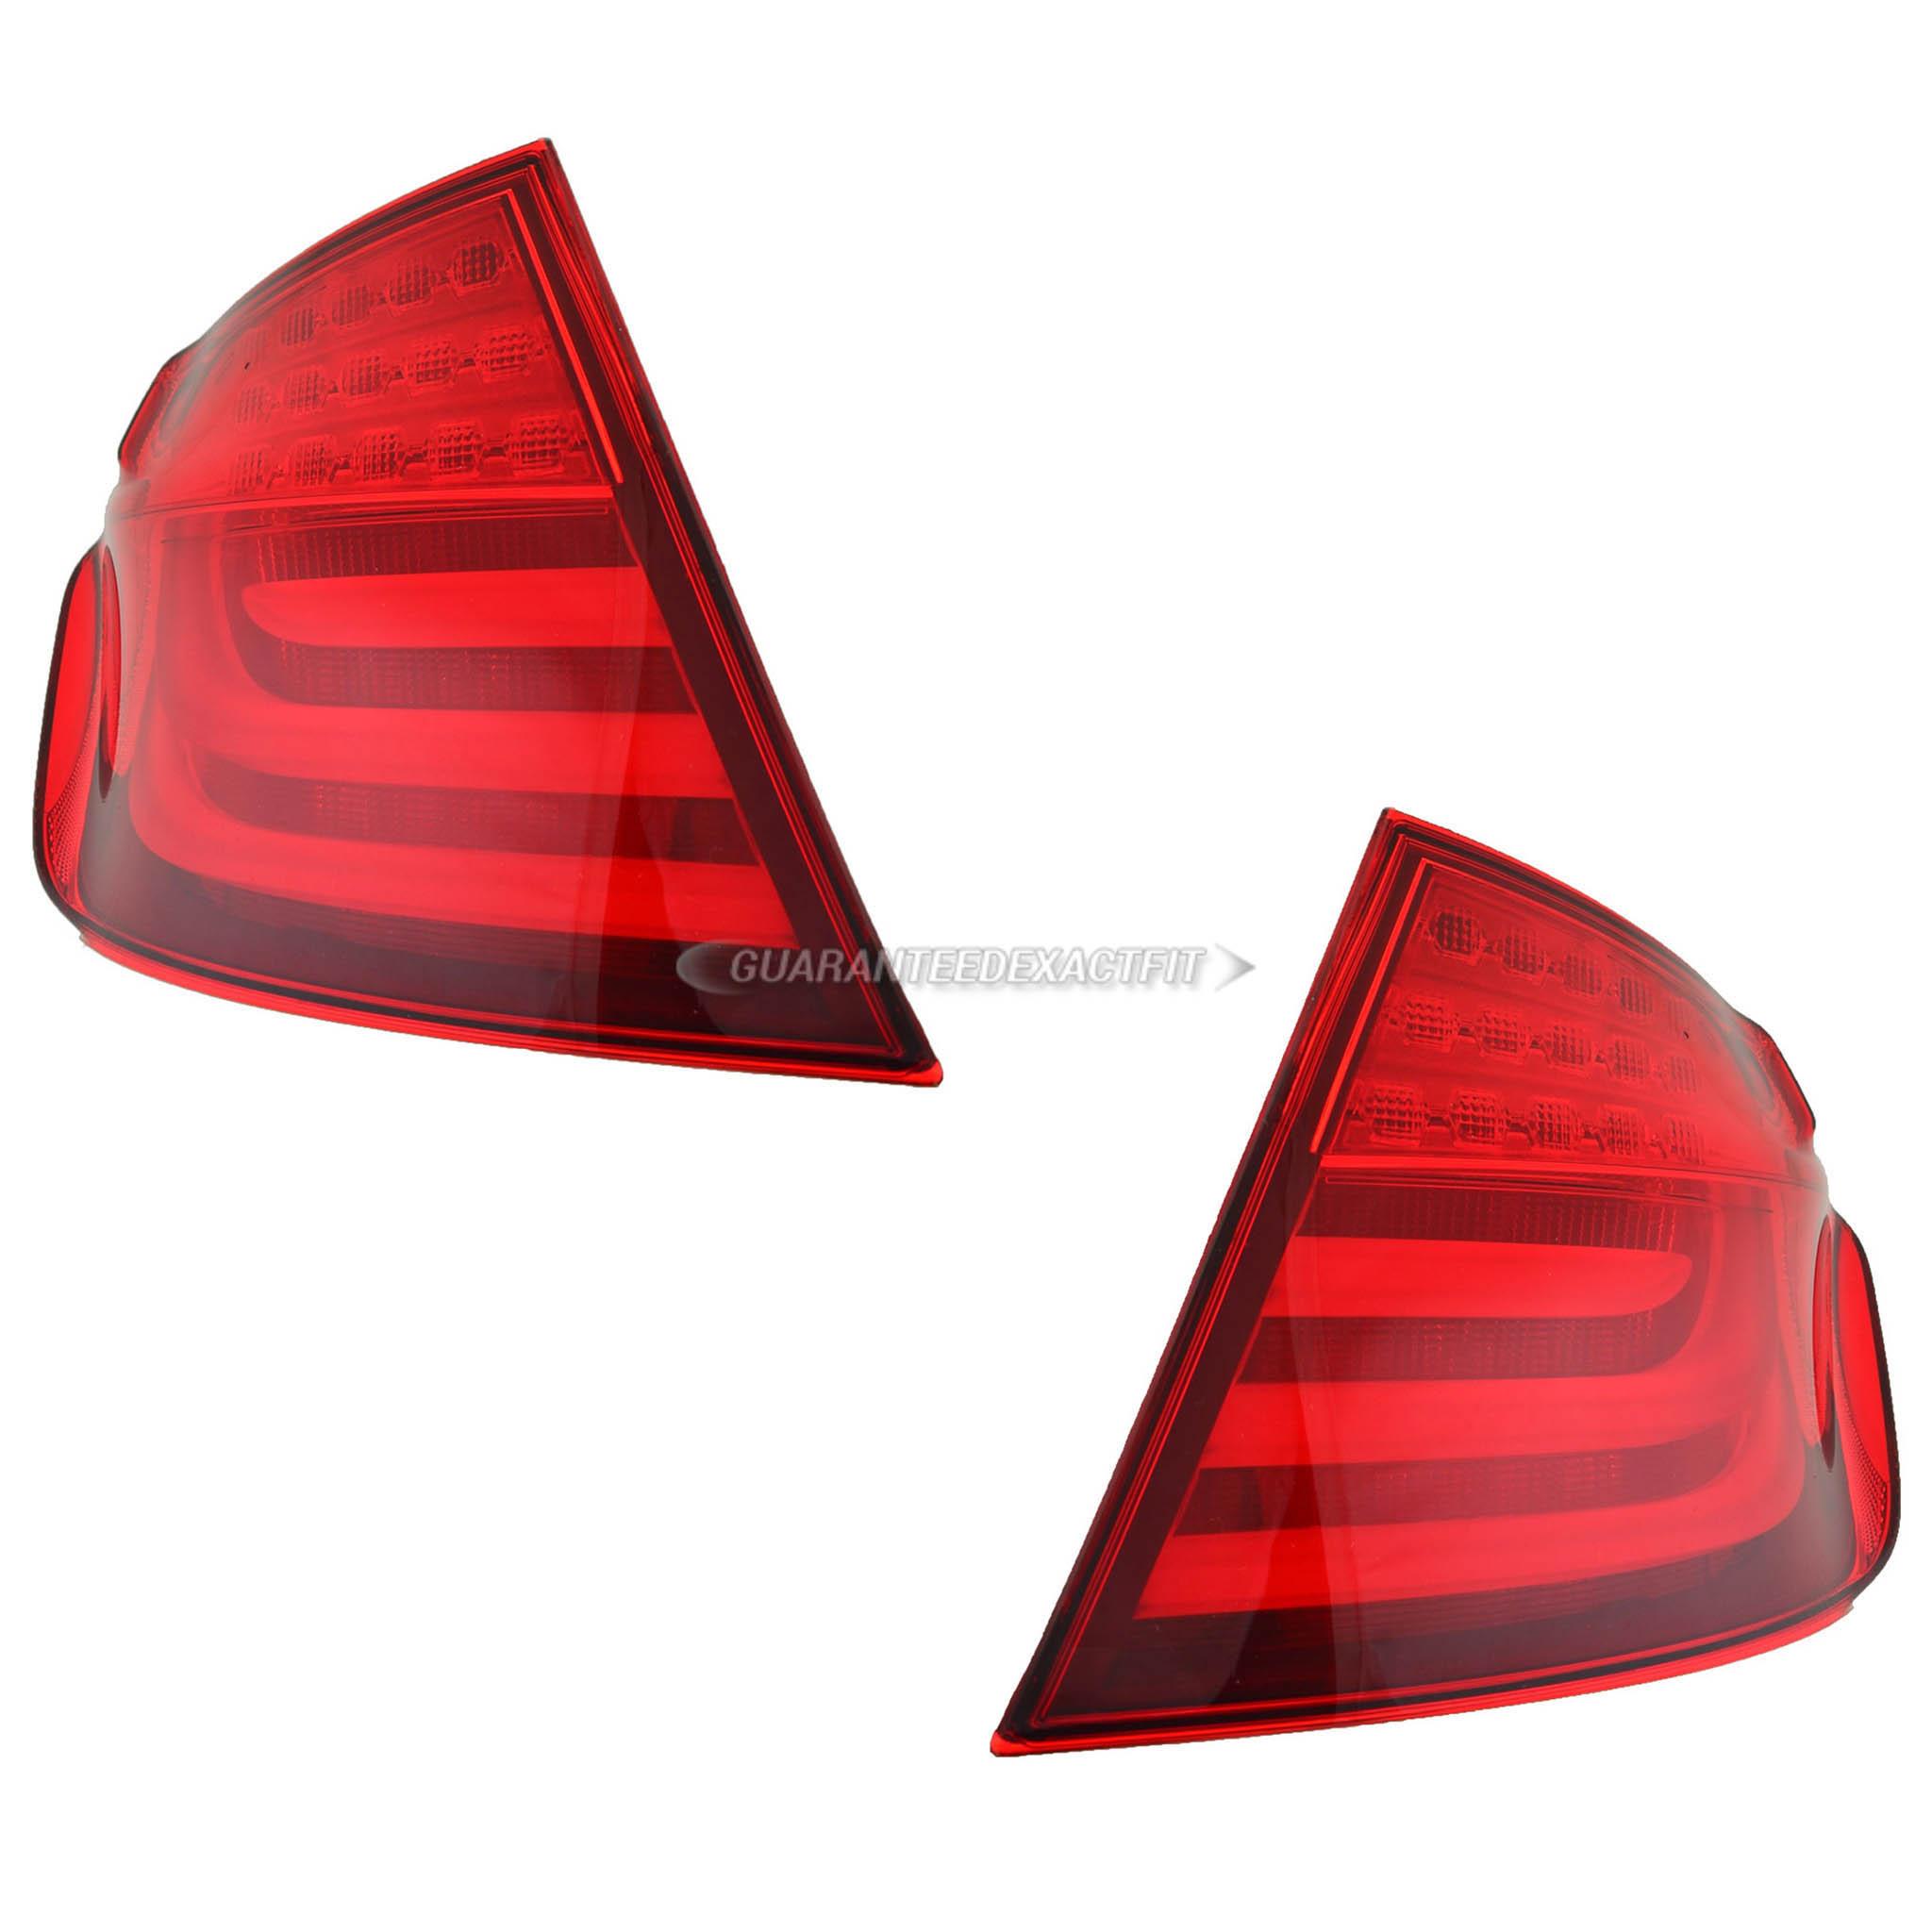 2010 Bmw 528 tail light assembly pair 